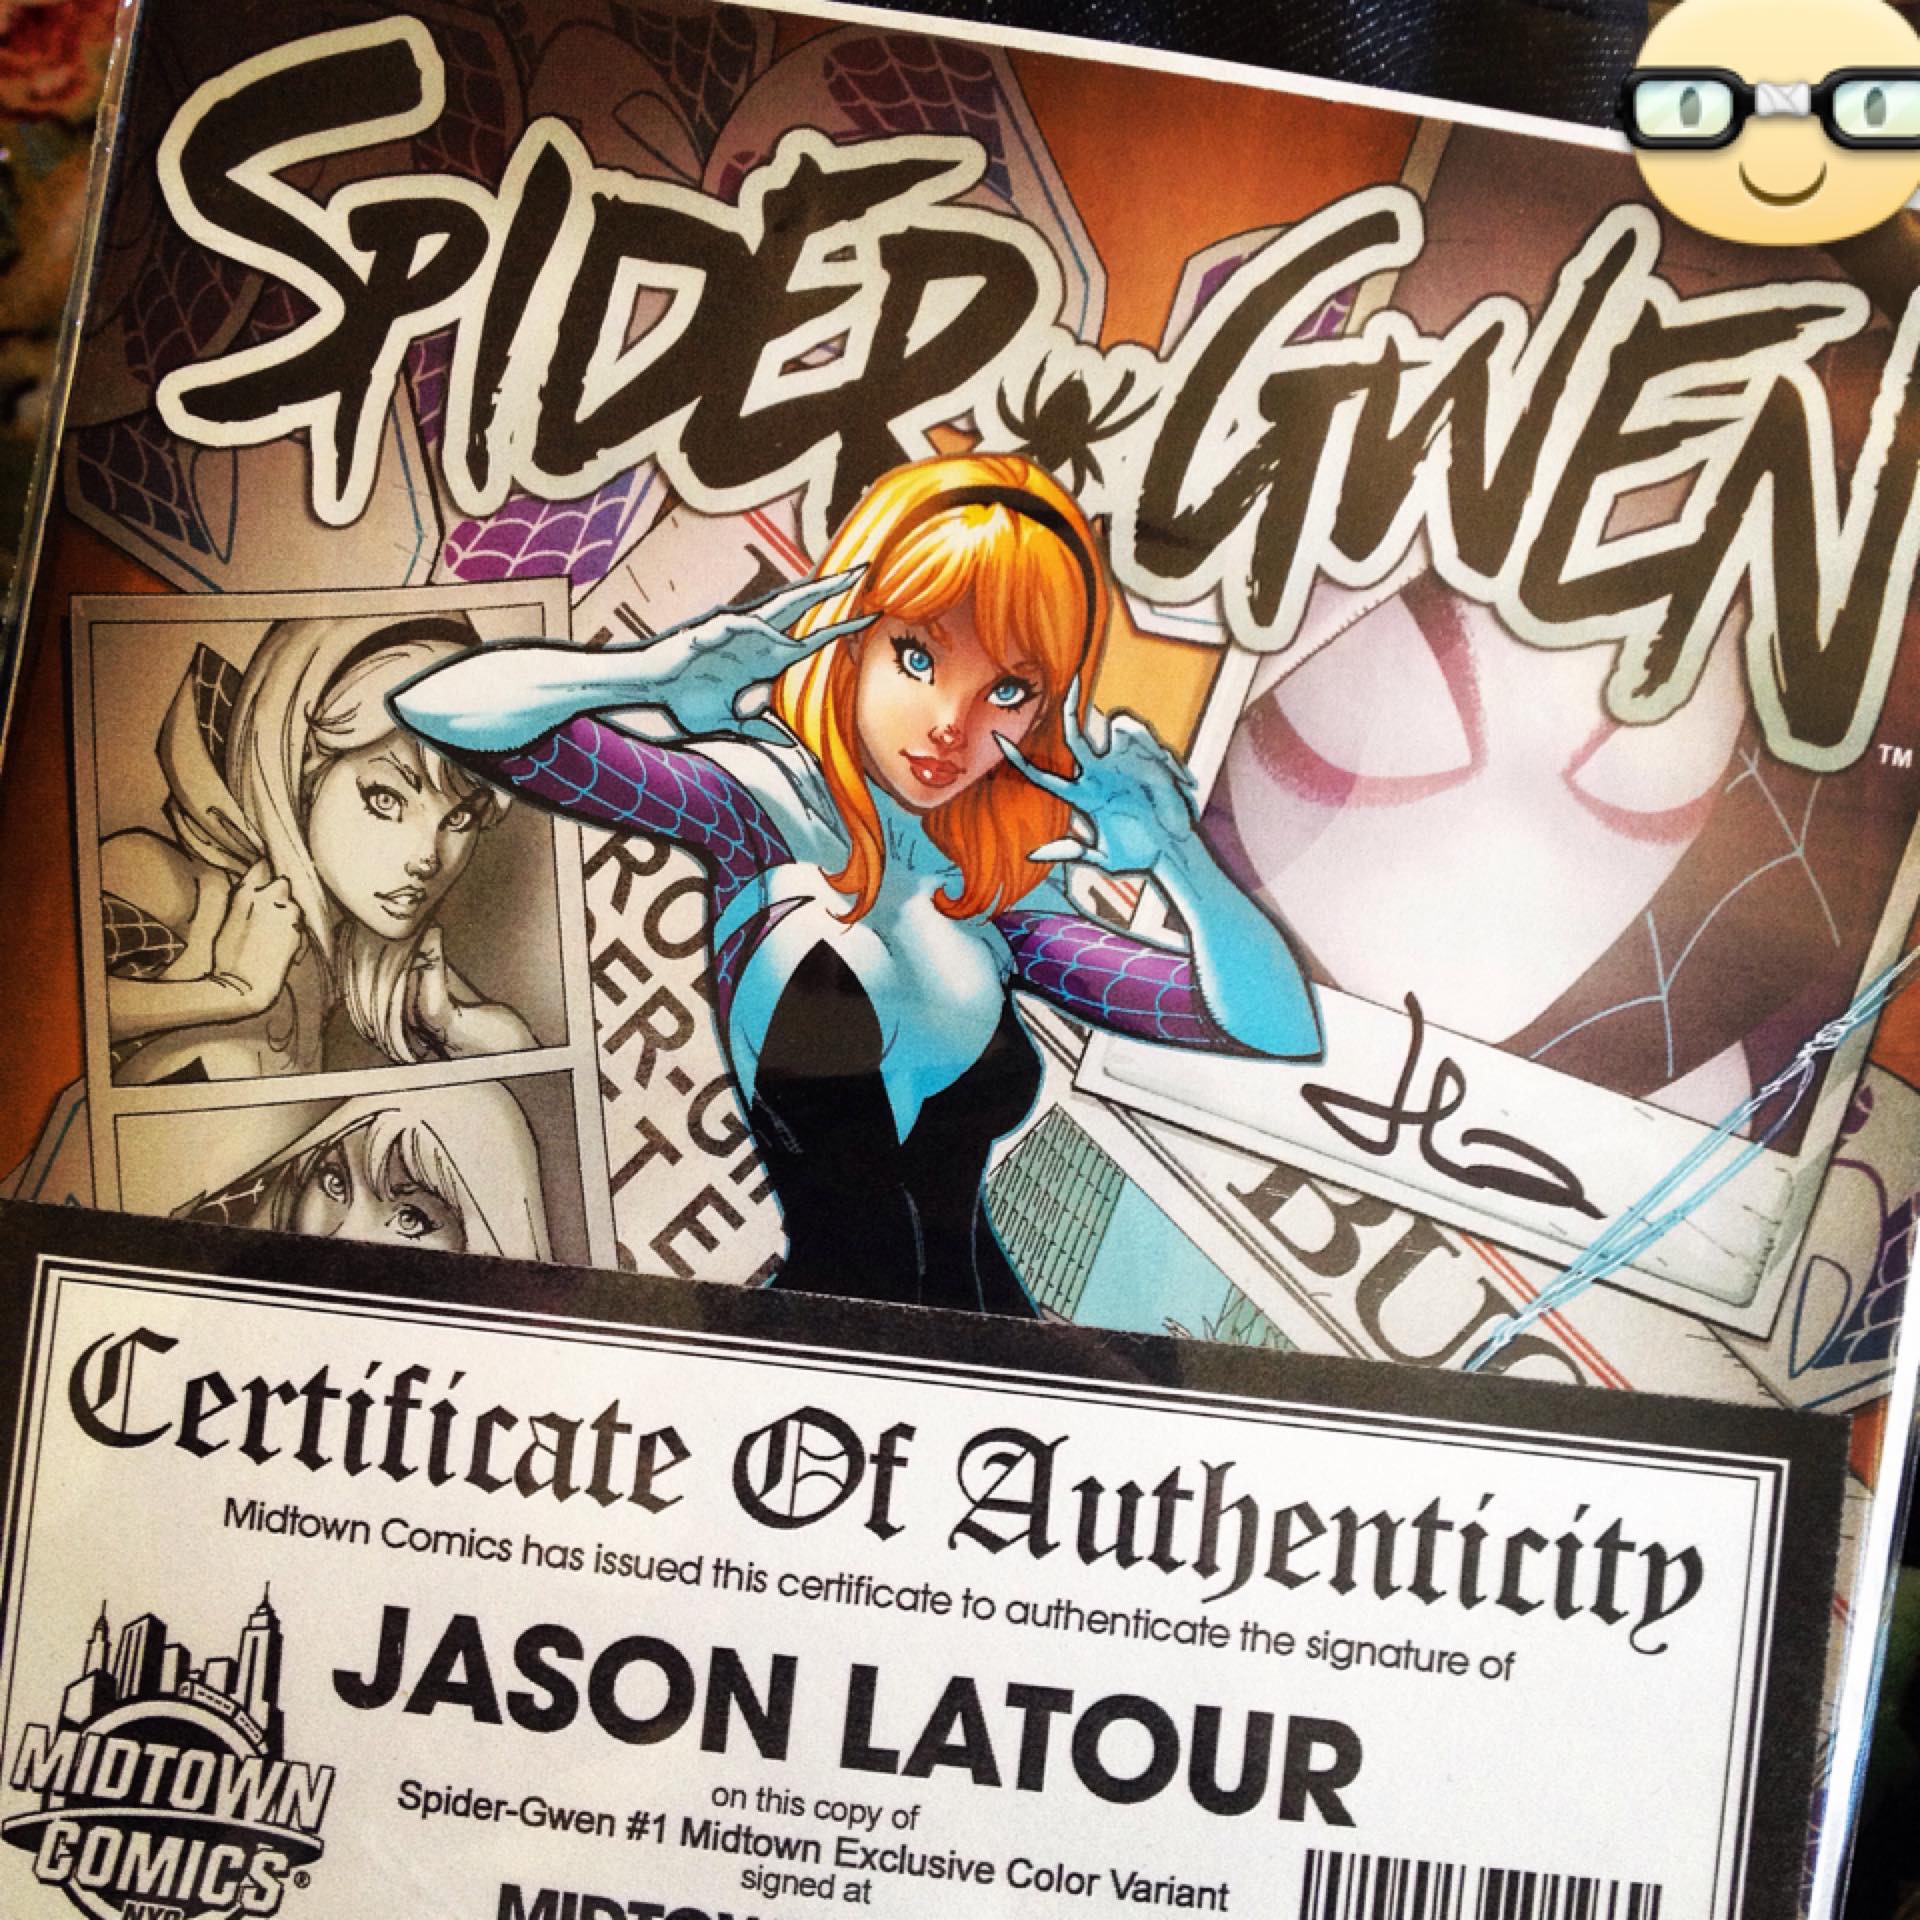 midtown comics - SalDEP Gwen Certificate Of Authenticity Midtown Comics has issued this certificate to authenticate the signature of Jason Latour Imidtown Comics on this copy of SpiderGwen 61 Midtown Exclusive Color Variant Mainta signed at